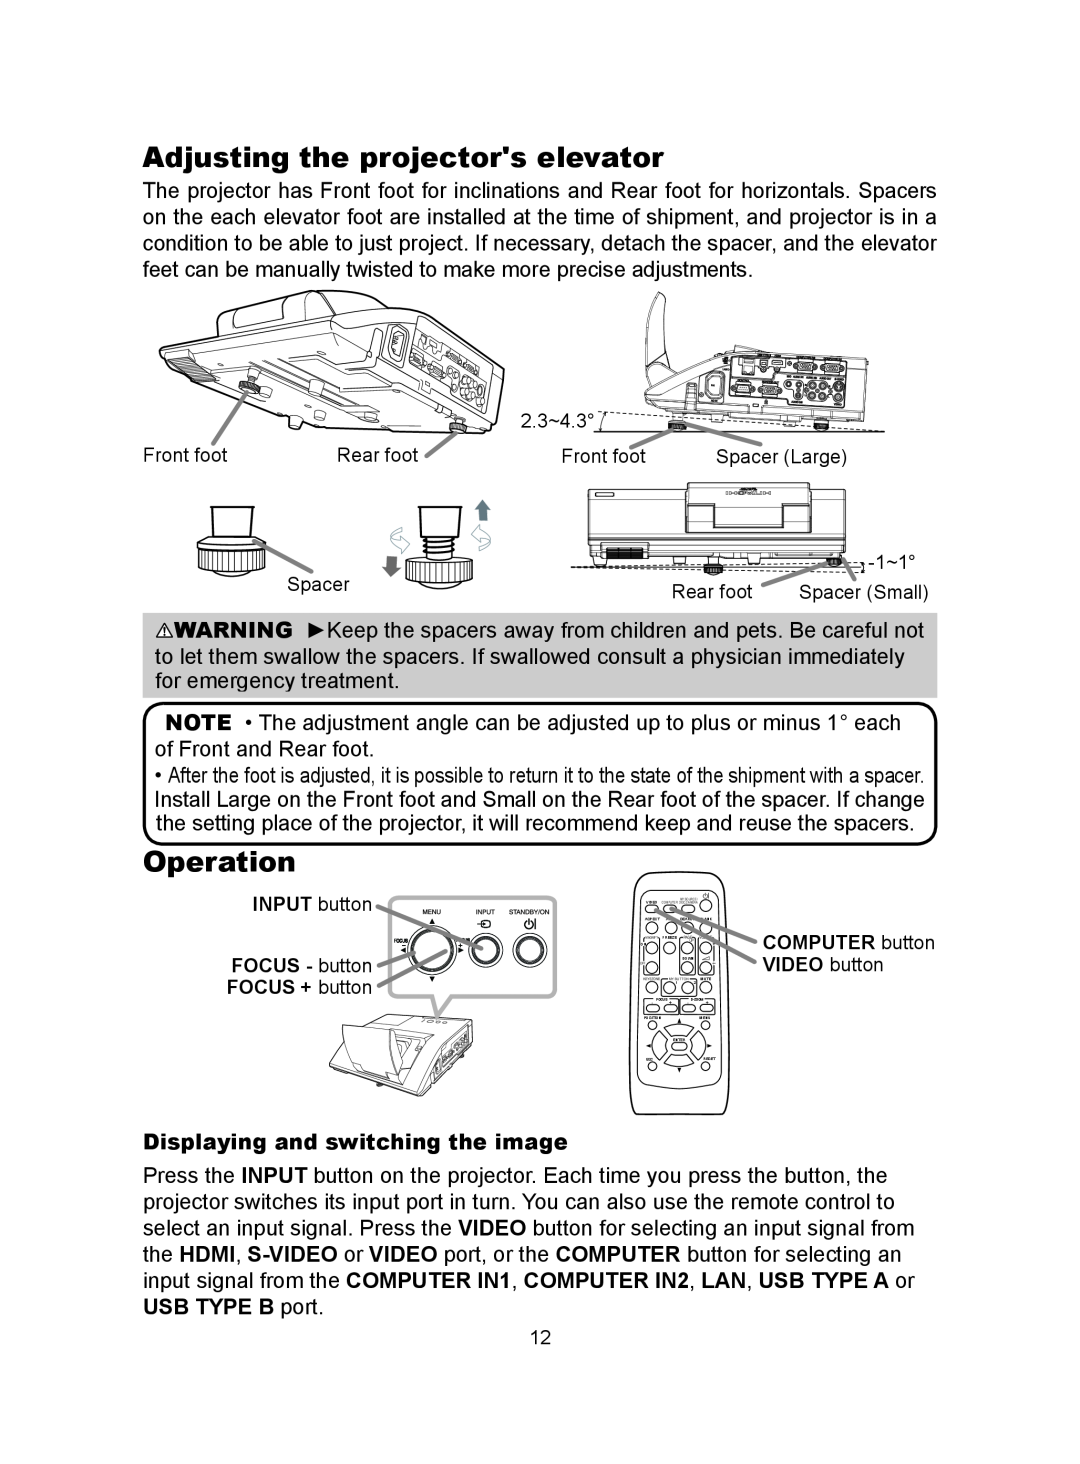 Hitachi CP-A300N user manual Adjusting the projectors elevator, Operation, Displaying and switching the image 